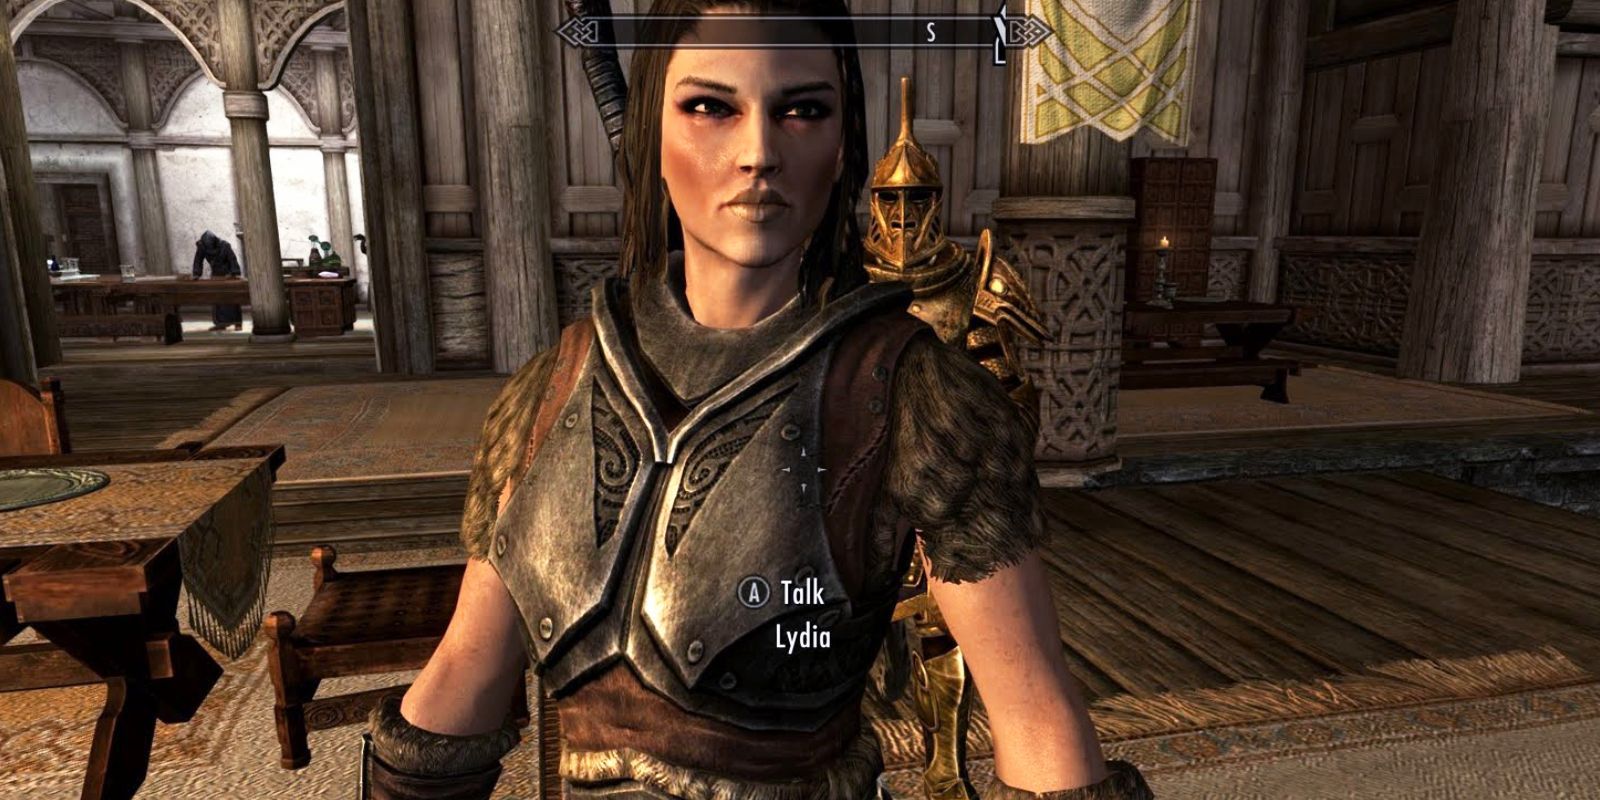 Lydia, the Whiterun housecarl waiting for the main character to talk in Skyrim.